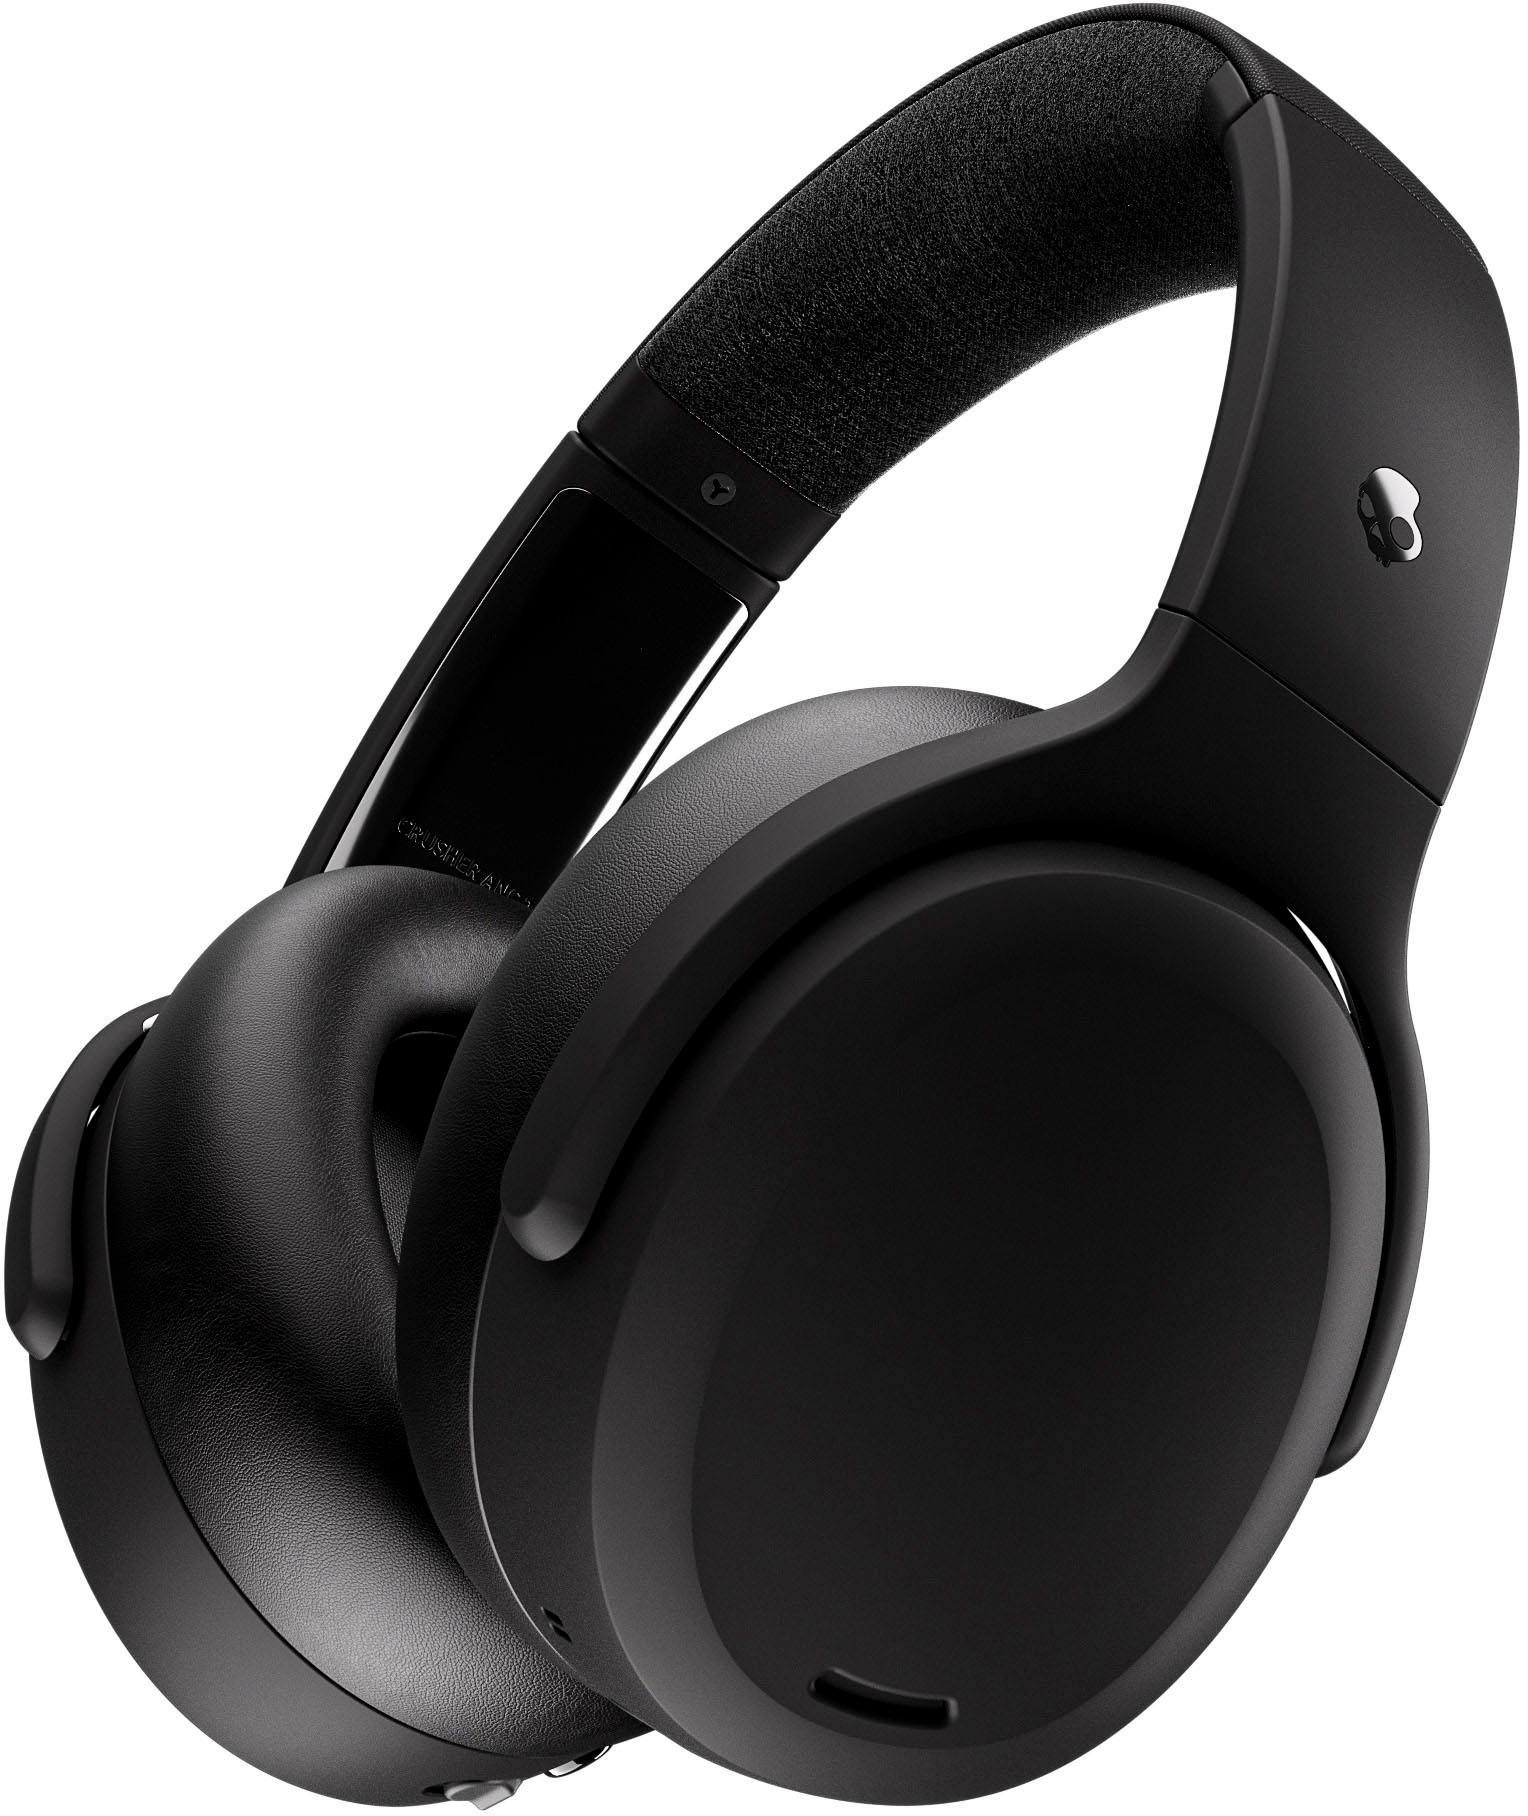 Angle View: Skullcandy - Crusher ANC 2 Over-the-Ear Noise Canceling Wireless Headphones - Black